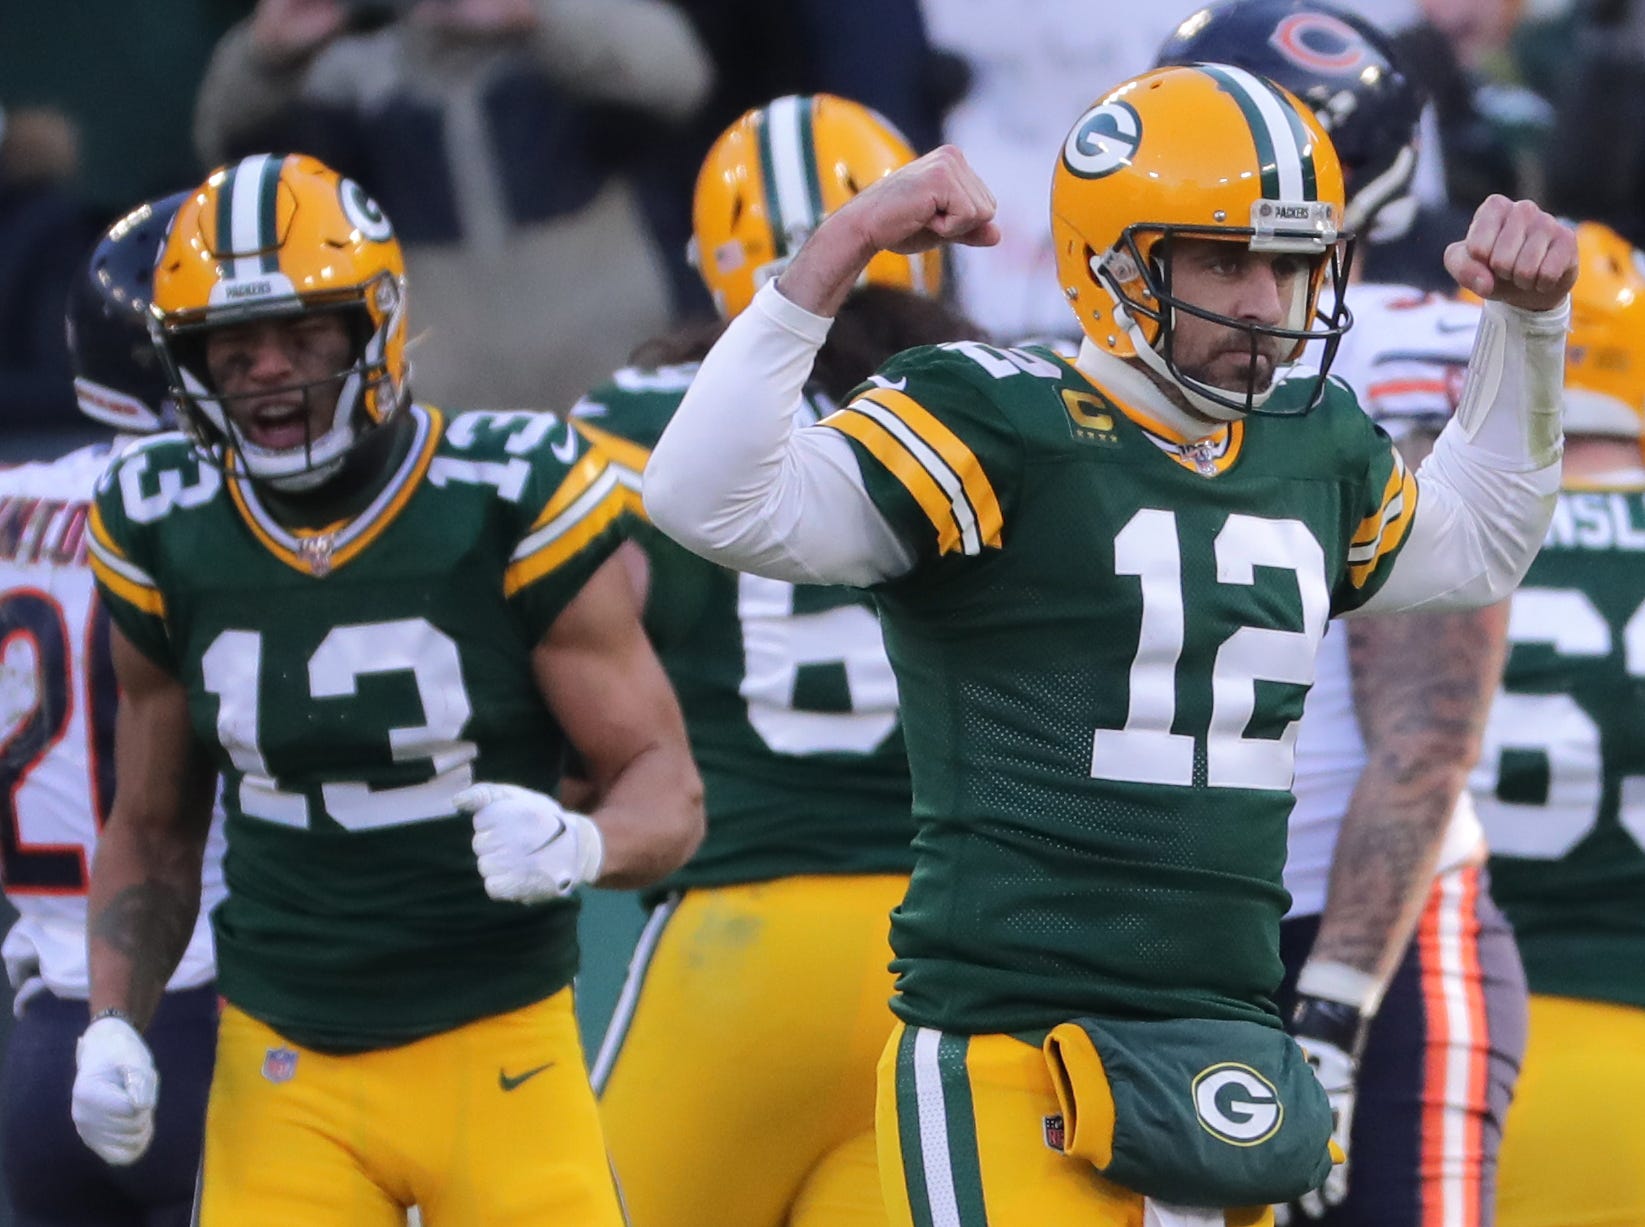 Green Bay Packers quarterback Aaron Rodgers (12) reacts after running back Aaron Jones scored a touchdown on a 2-yard run during the third quarter of their game Sunday, December 15, 2019 at Lambeau Field in Green Bay, Wis. The Green Bay Packers beat the Chicago Bears 21-13.